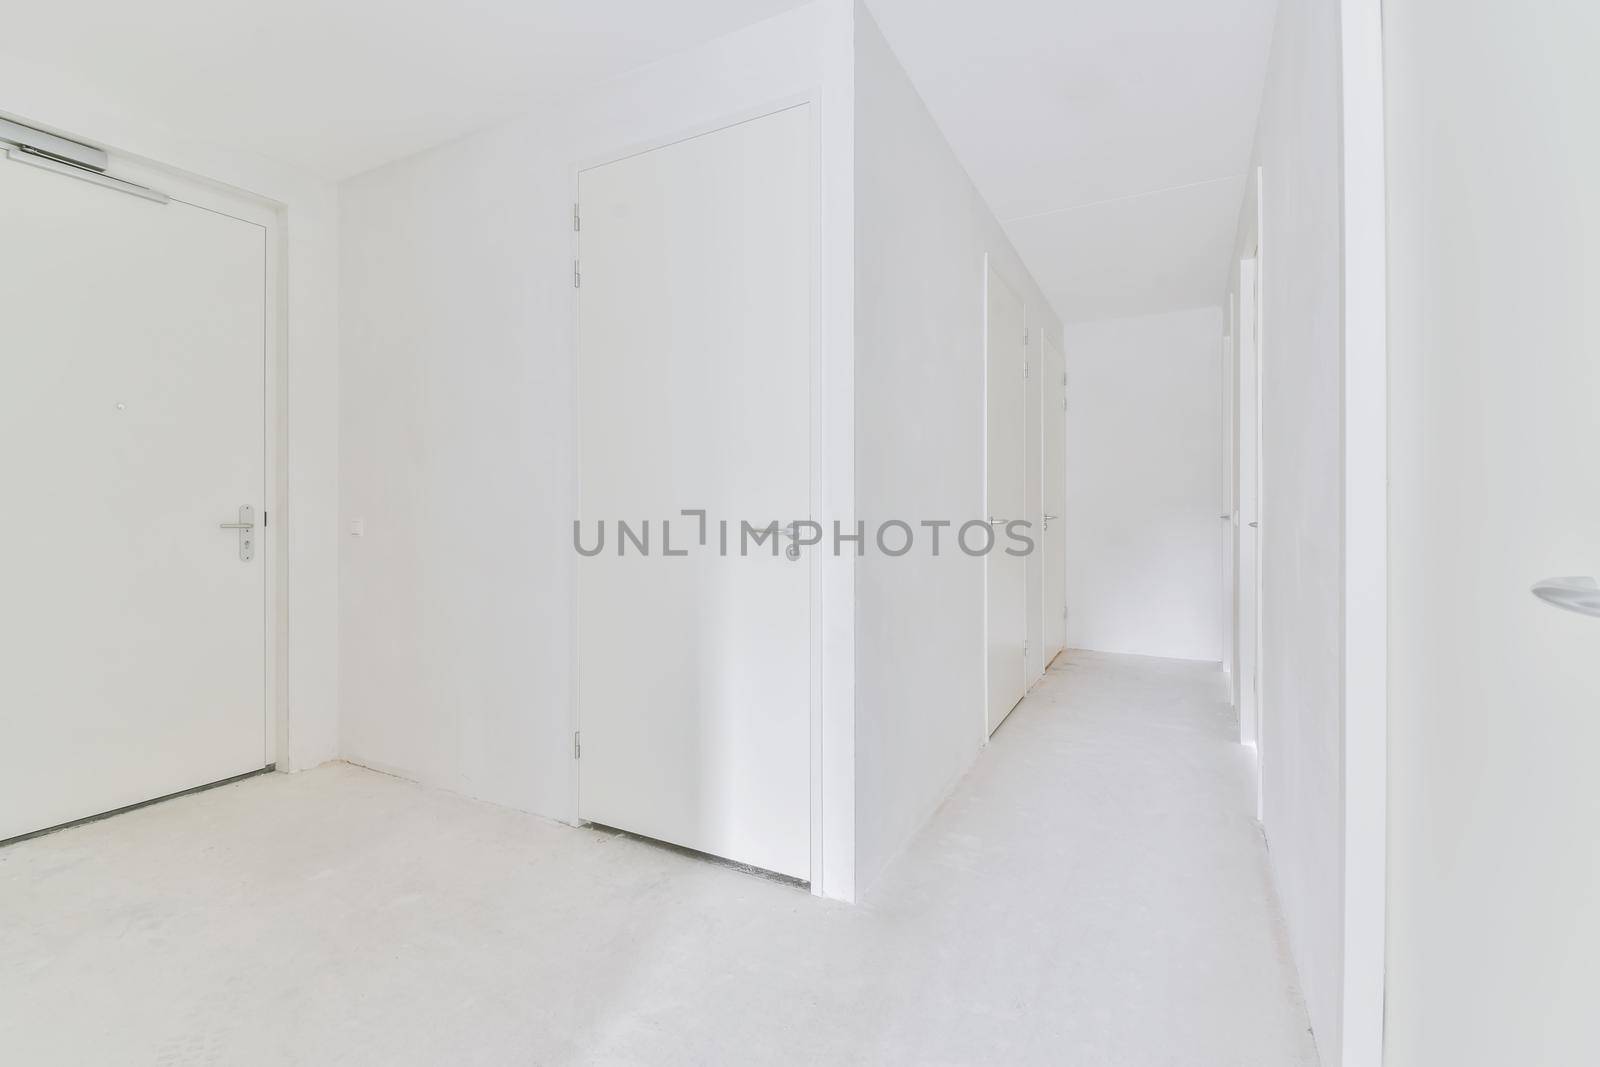 A completely white hallway by casamedia